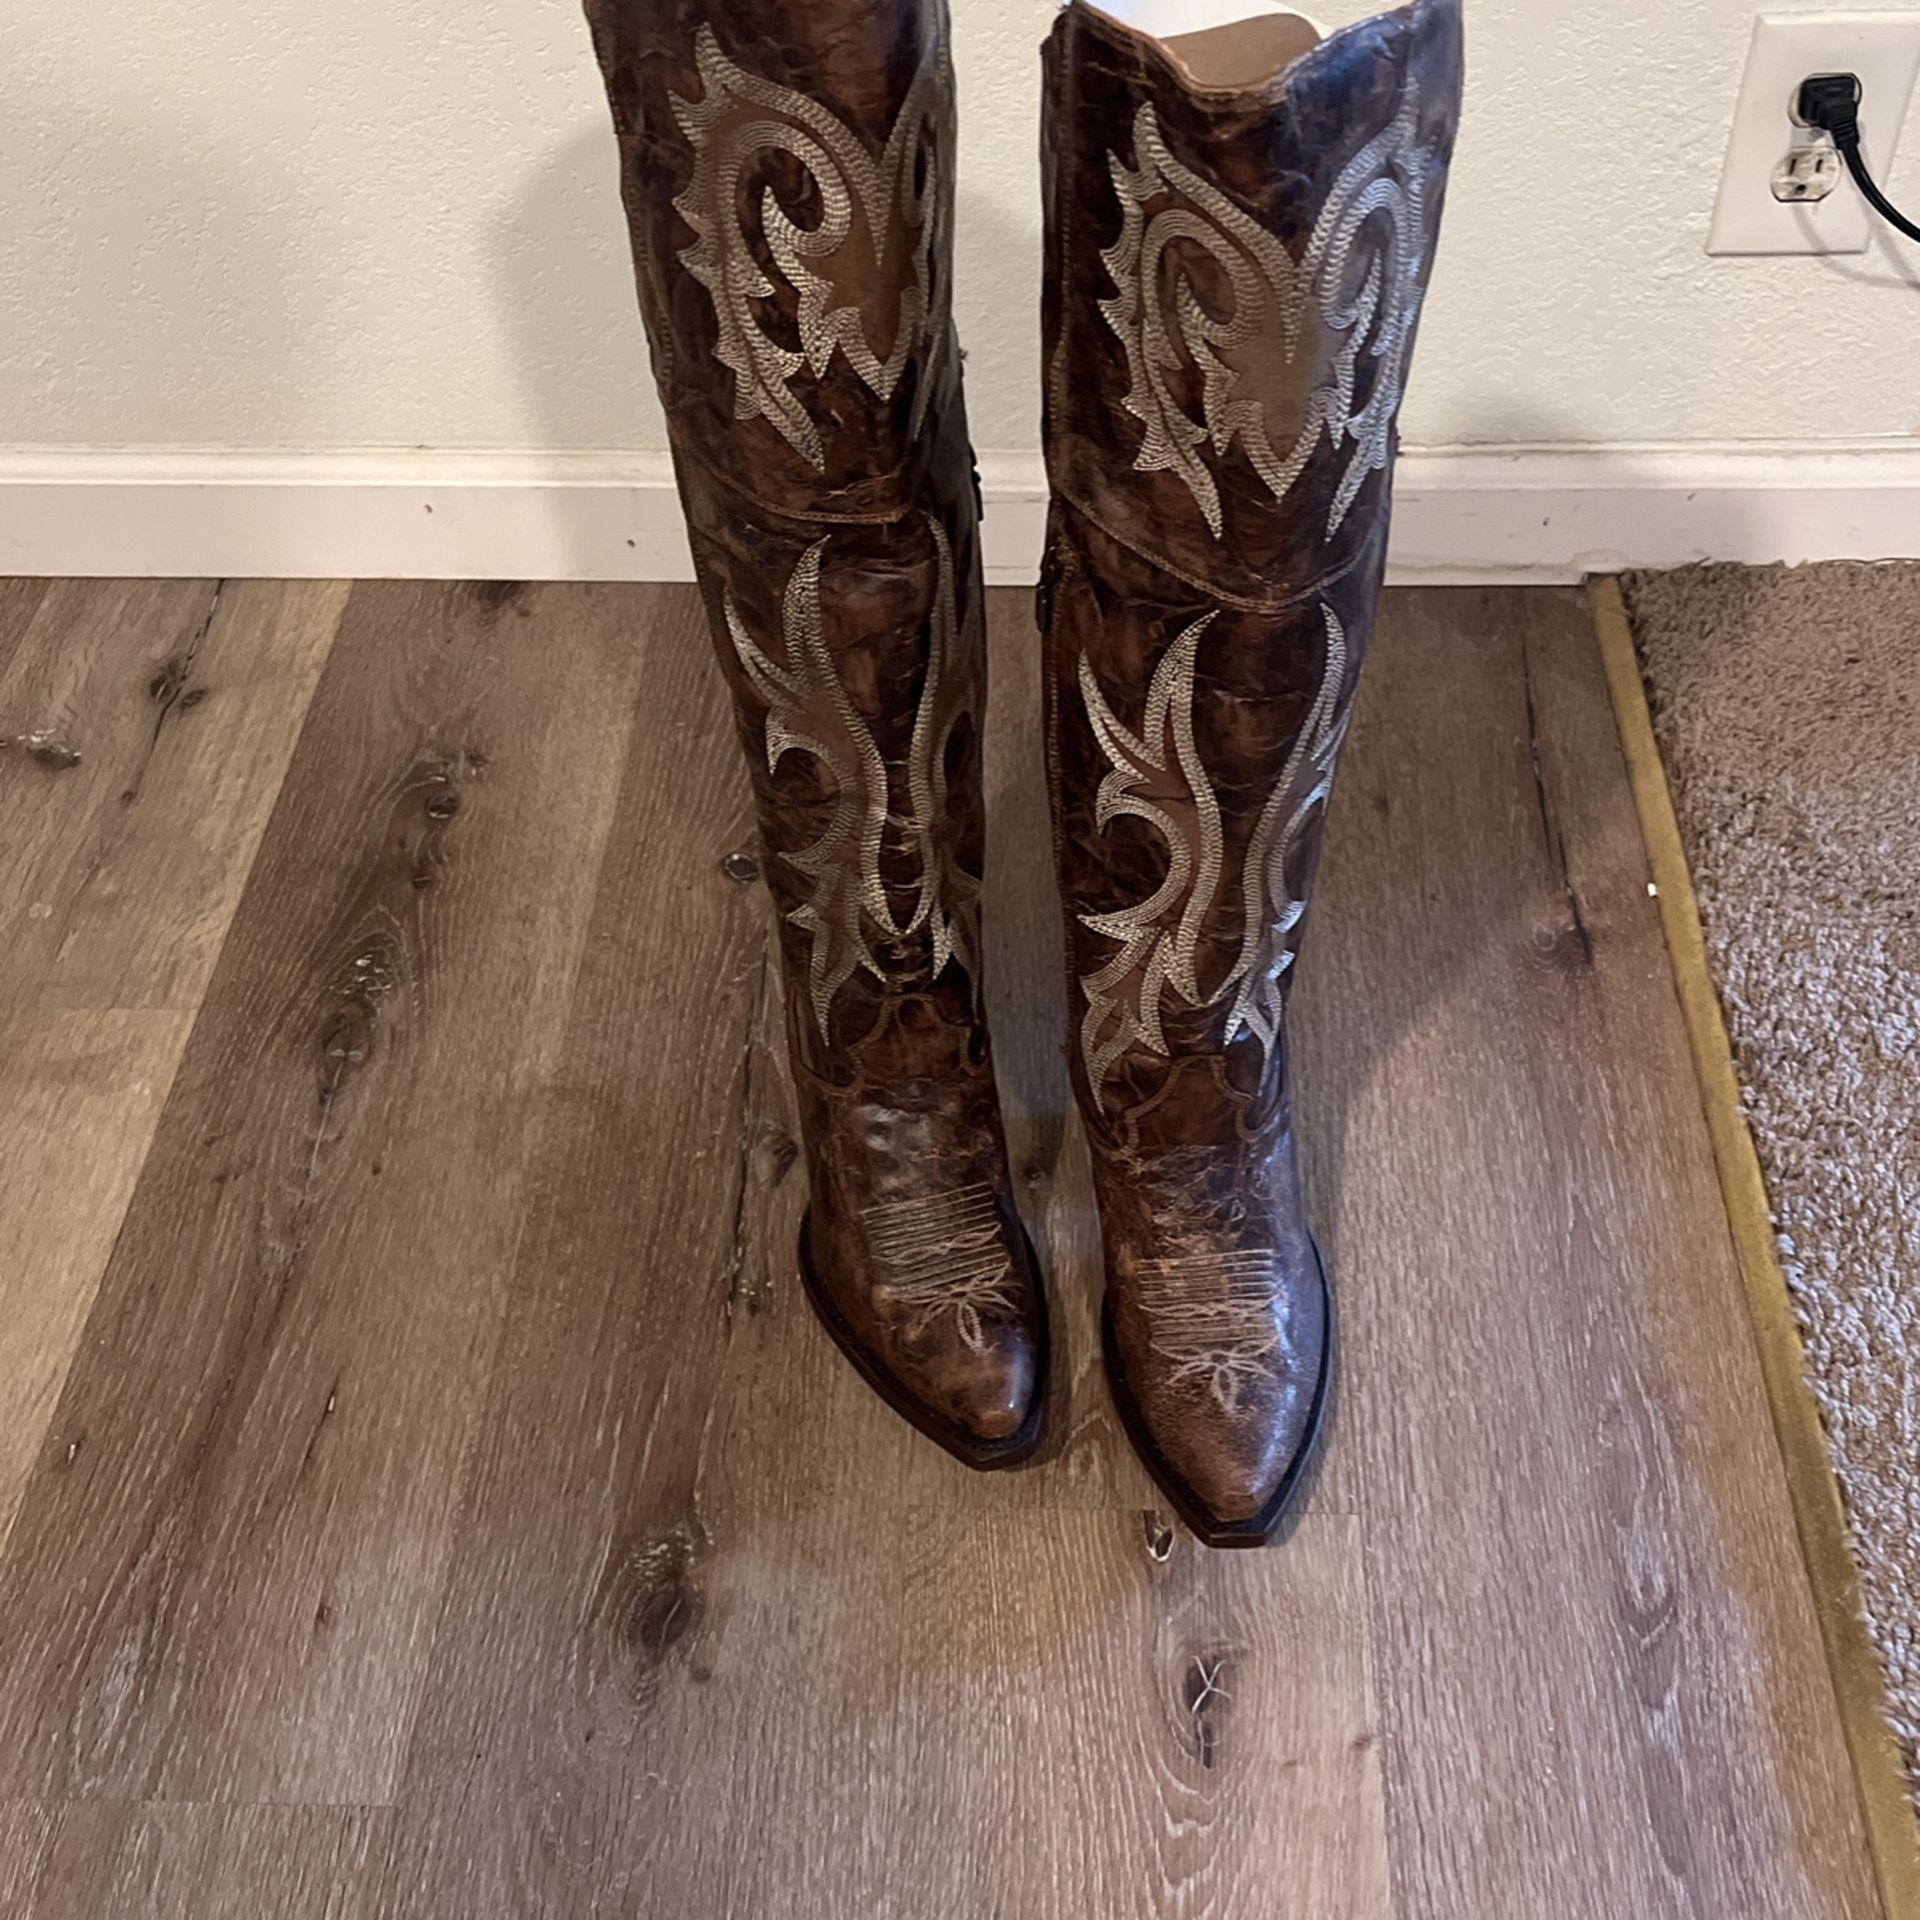  Cowboy Boots Womens Boots Dan Post Size 10 Brown Cowboy Boots Knee High Sexy Boots Womens Boots